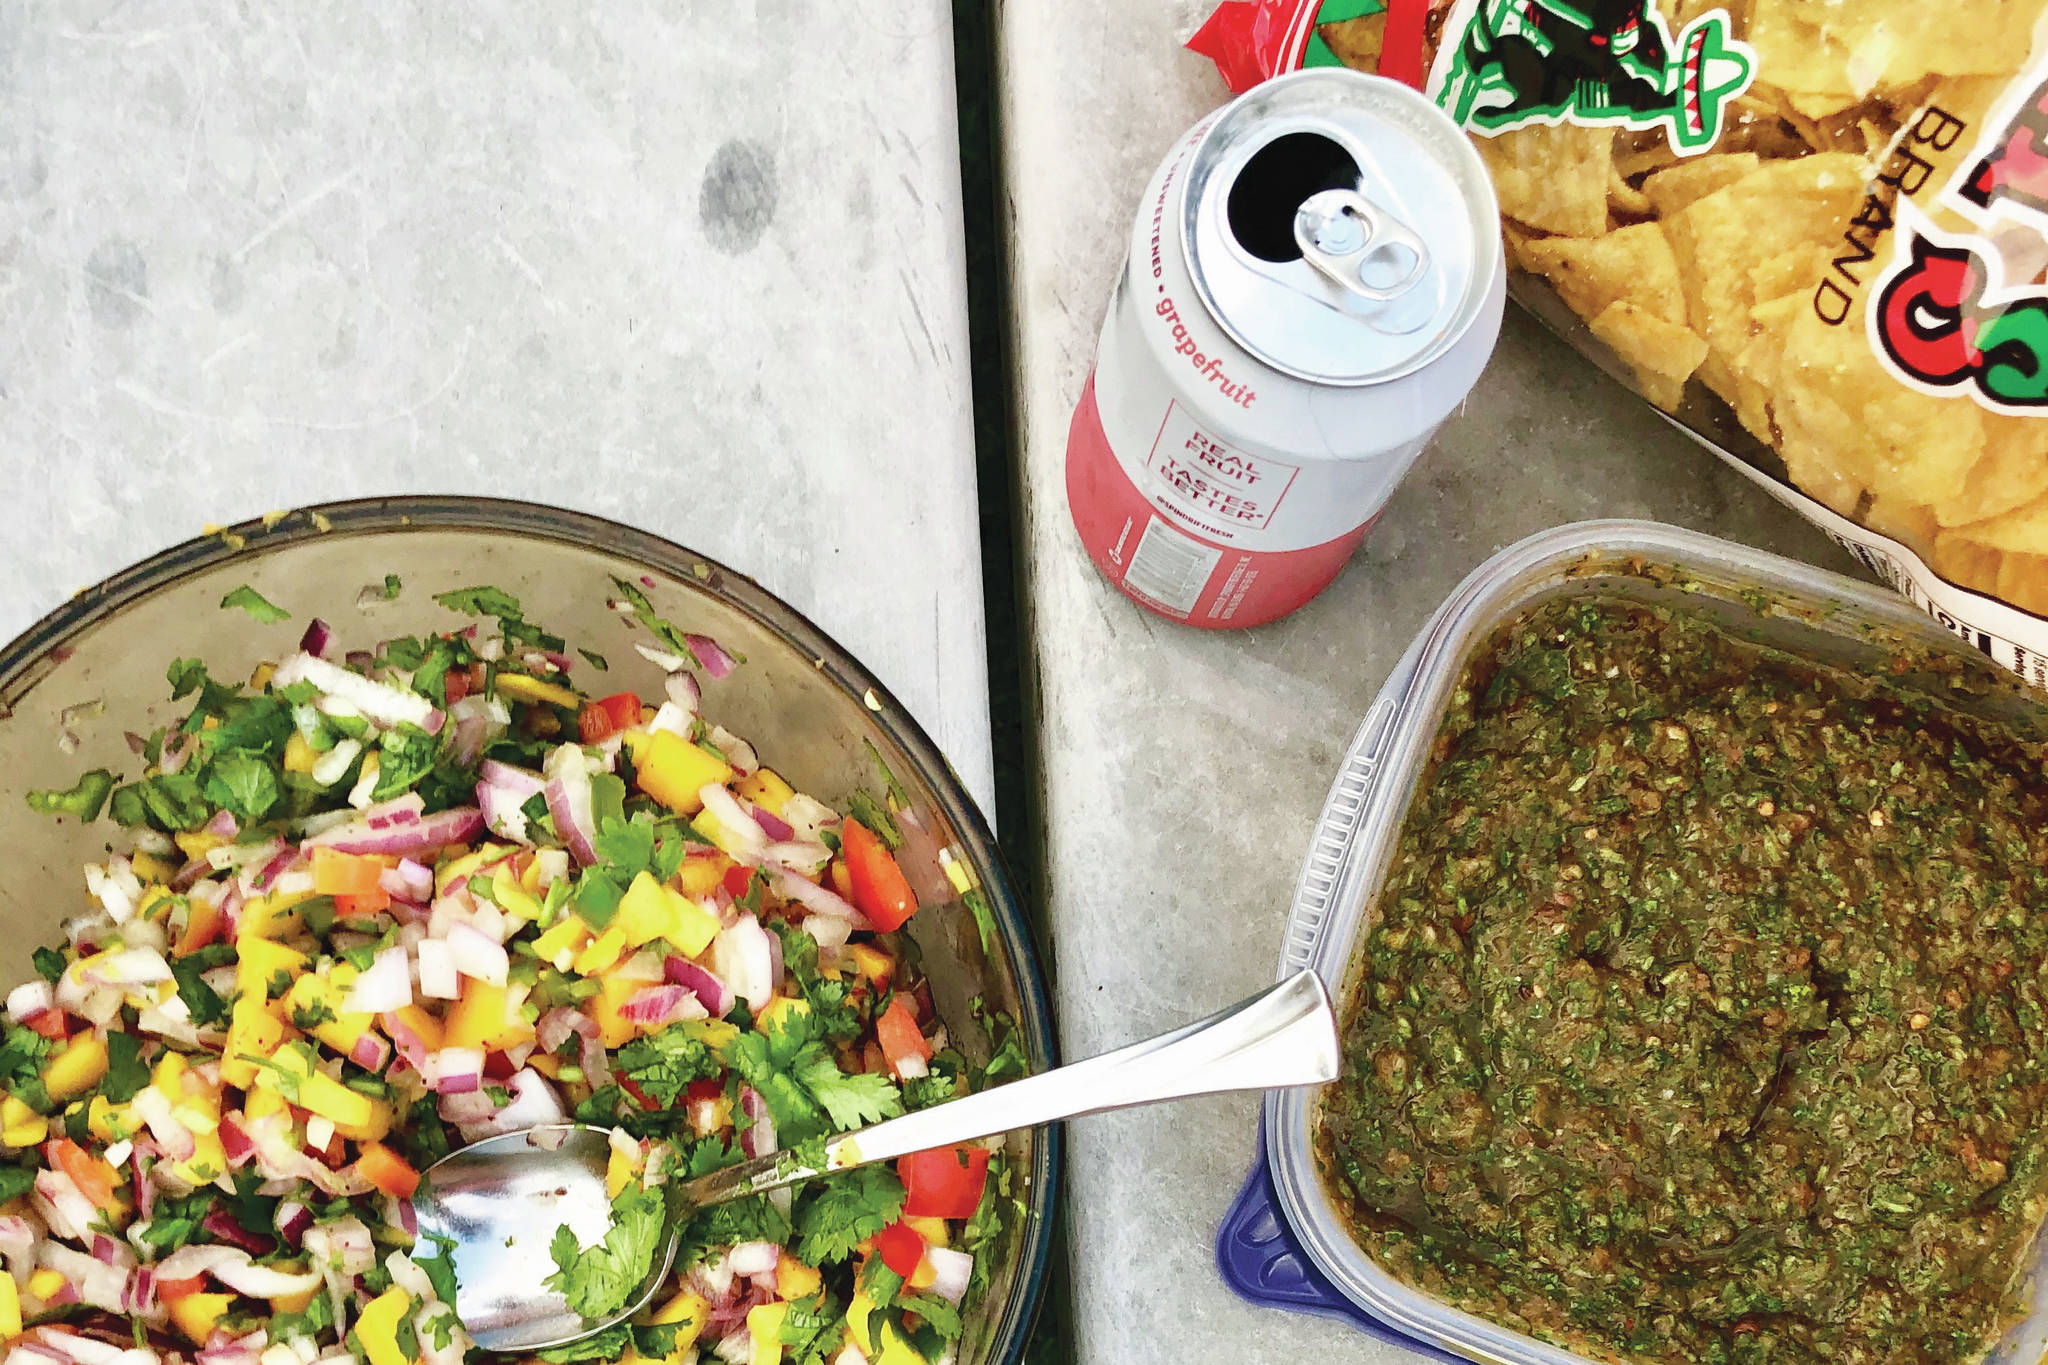 A bowl of mango salsa, next to a bowl of salsa verde, are accompanied by seltzer water, tortilla chips and a shrimp tacos birthday meal on Aug. 21, 2020 in Anchorage, Alaska. (Photo by Victoria Petersen/Peninsula Clarion)